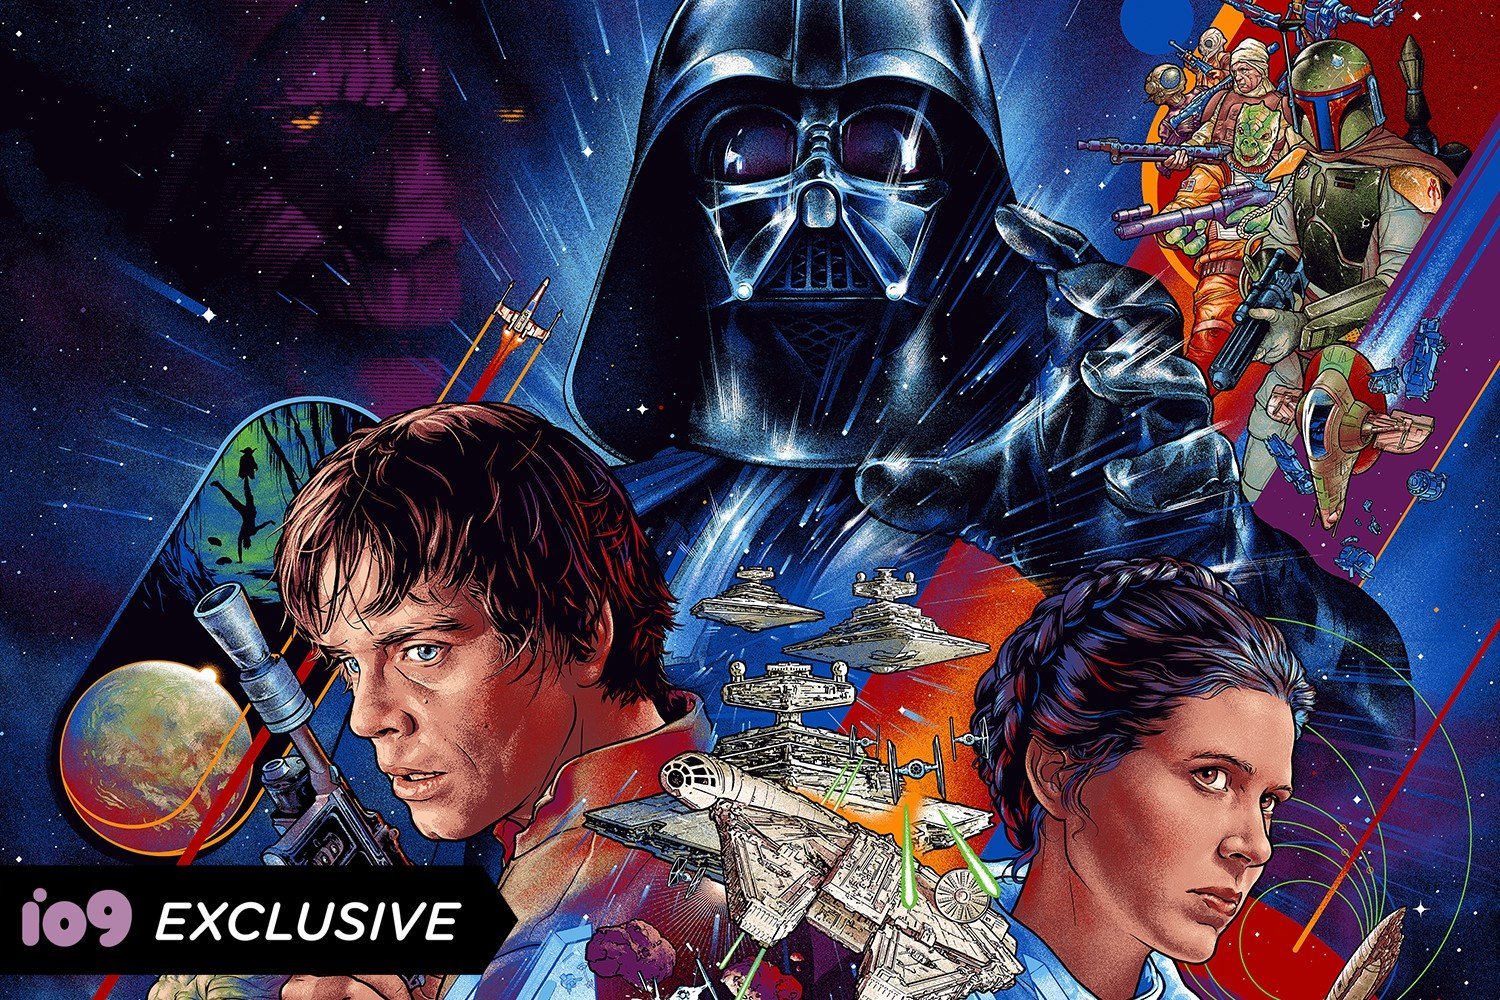 We Love This Jaw-Dropping Empire Strikes Back Poster, and It Knows